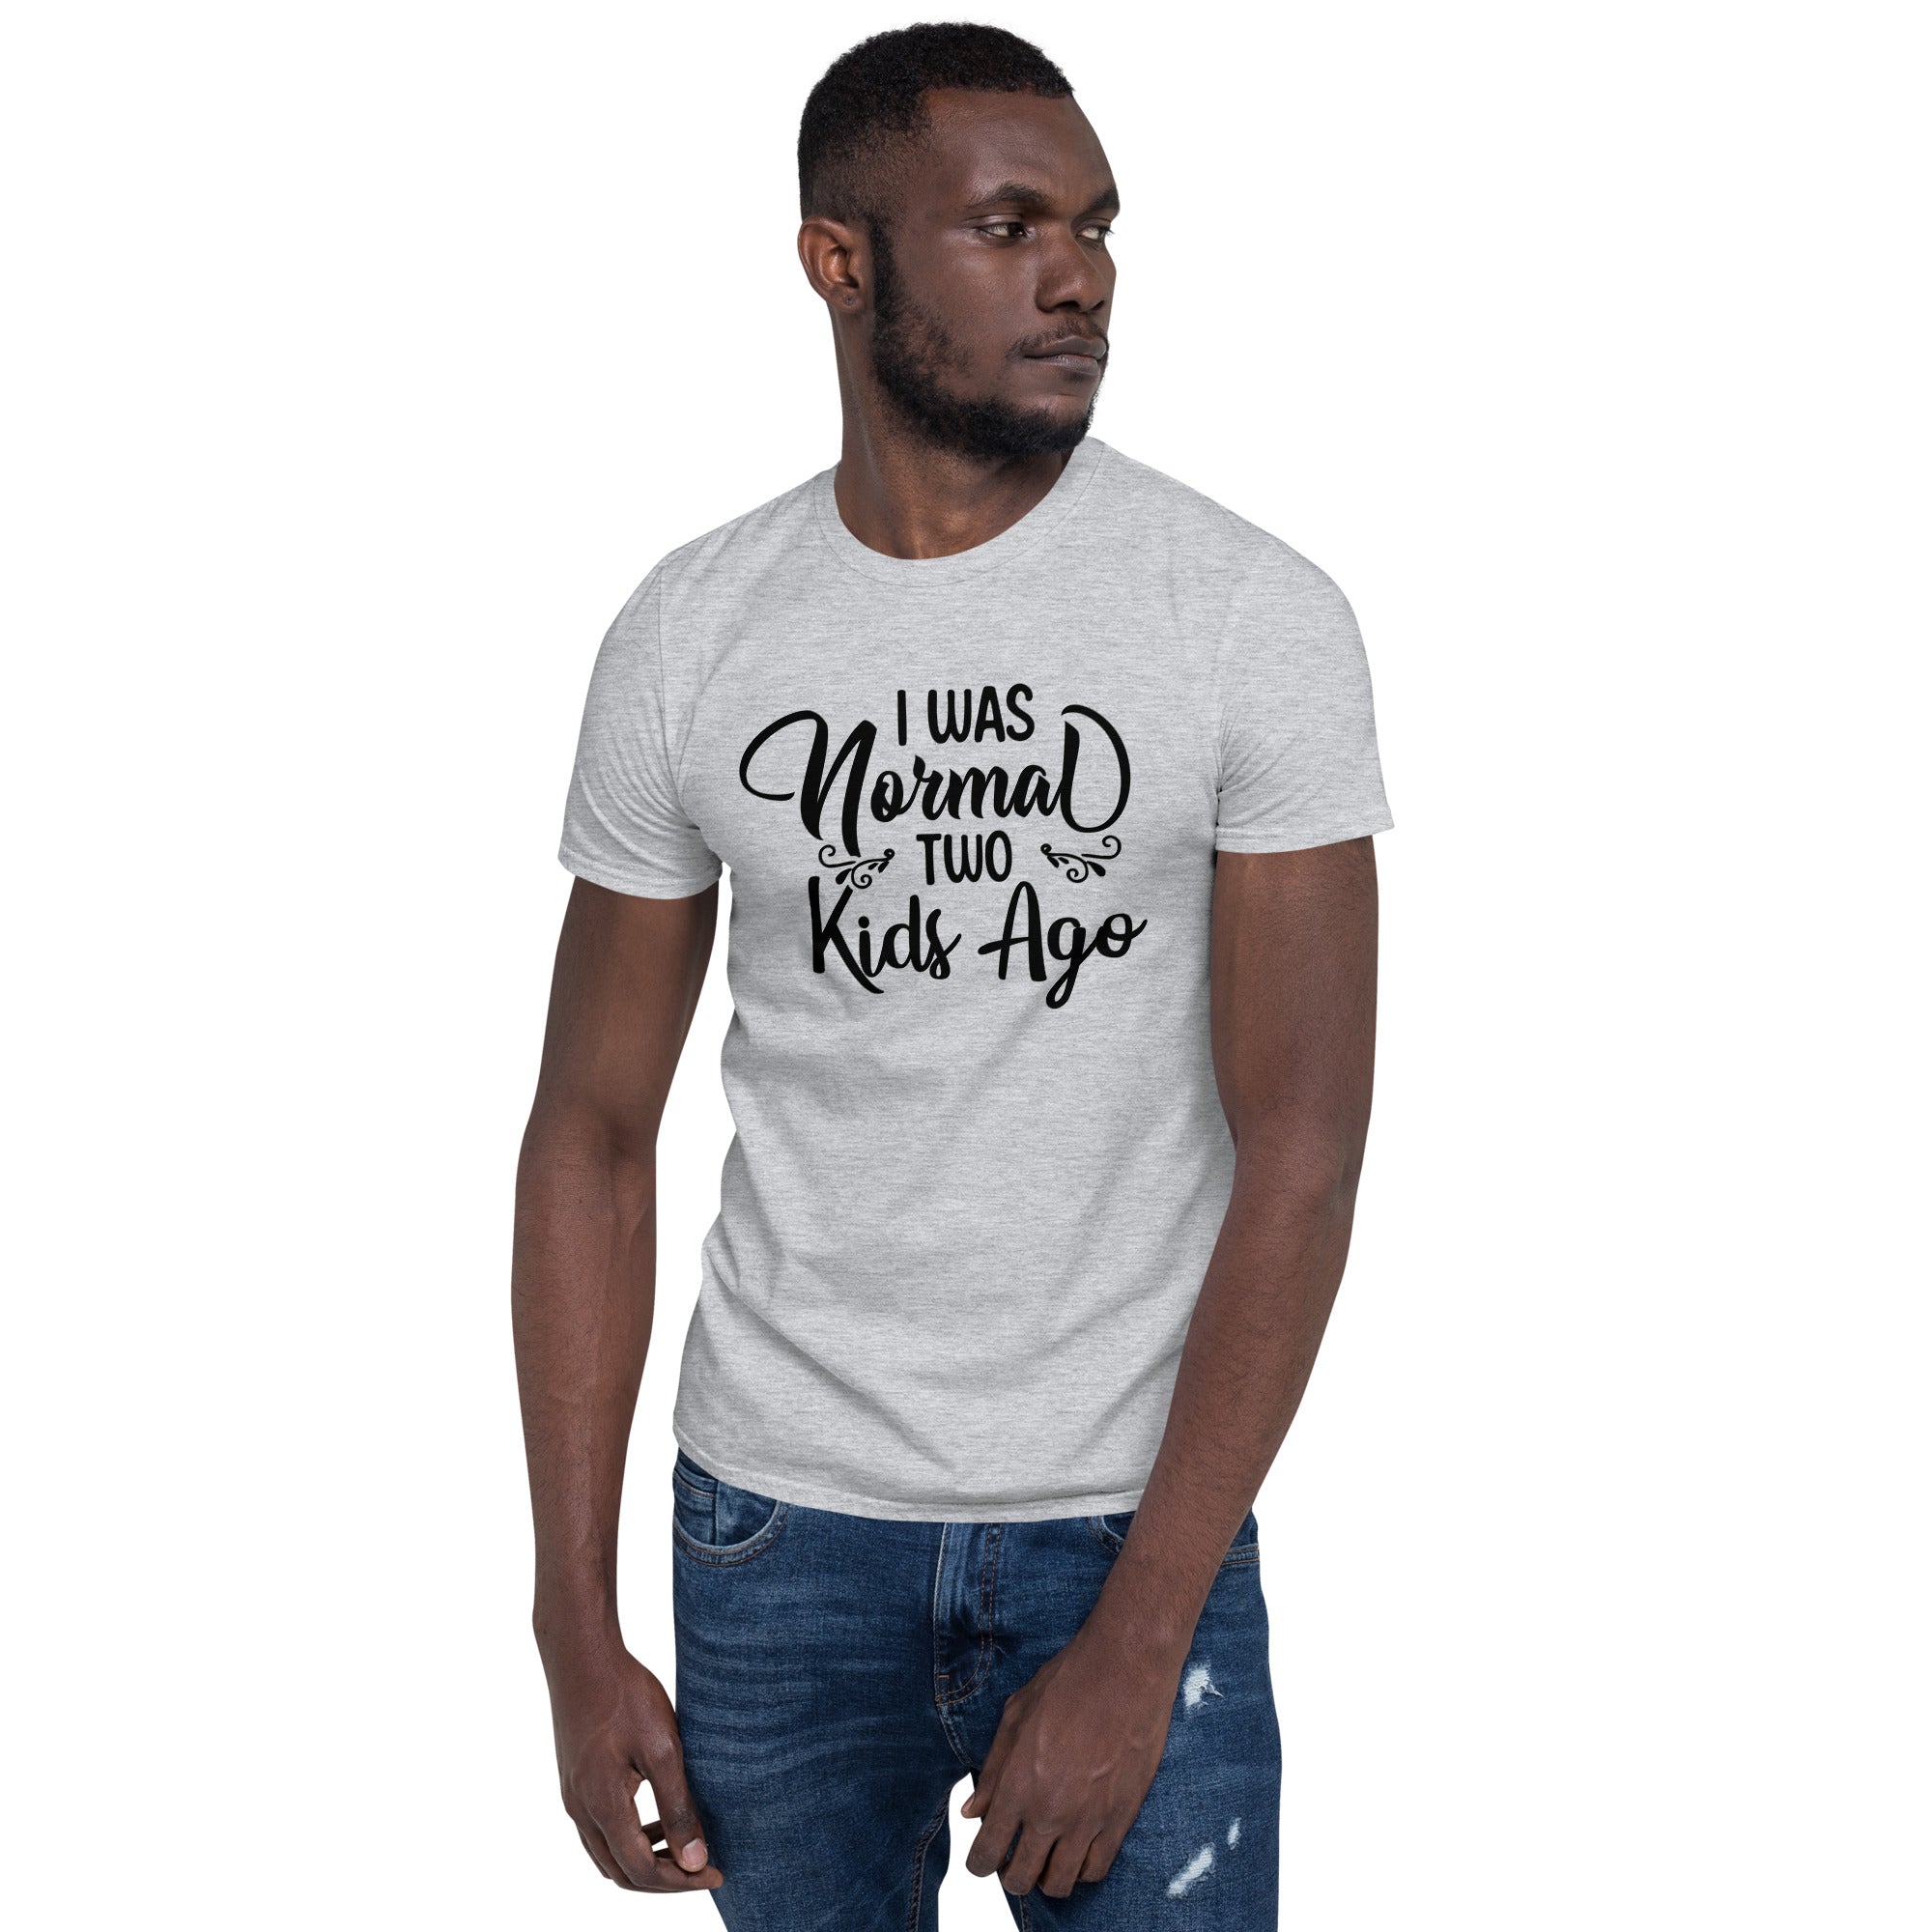 I Was Normal Two Kids Ago - Short-Sleeve Unisex T-Shirt